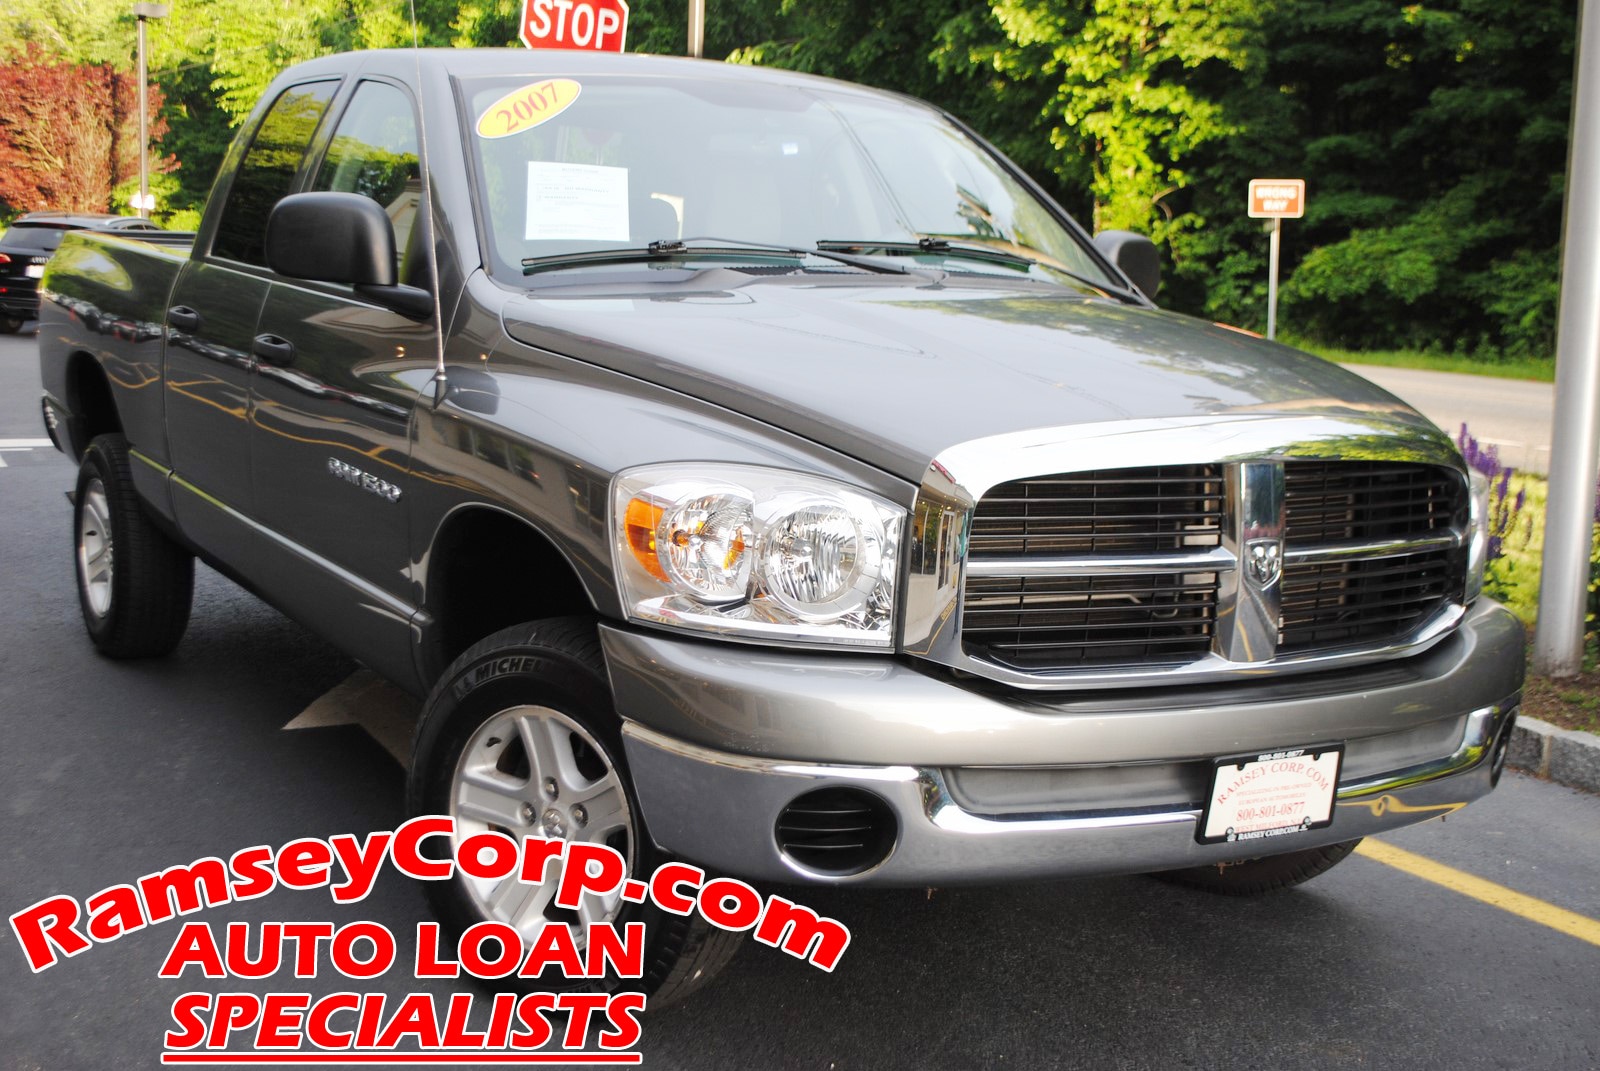 Used 2007 Dodge Ram 1500 For at Ramsey Corp. VIN: 1D7HU18N37S147009